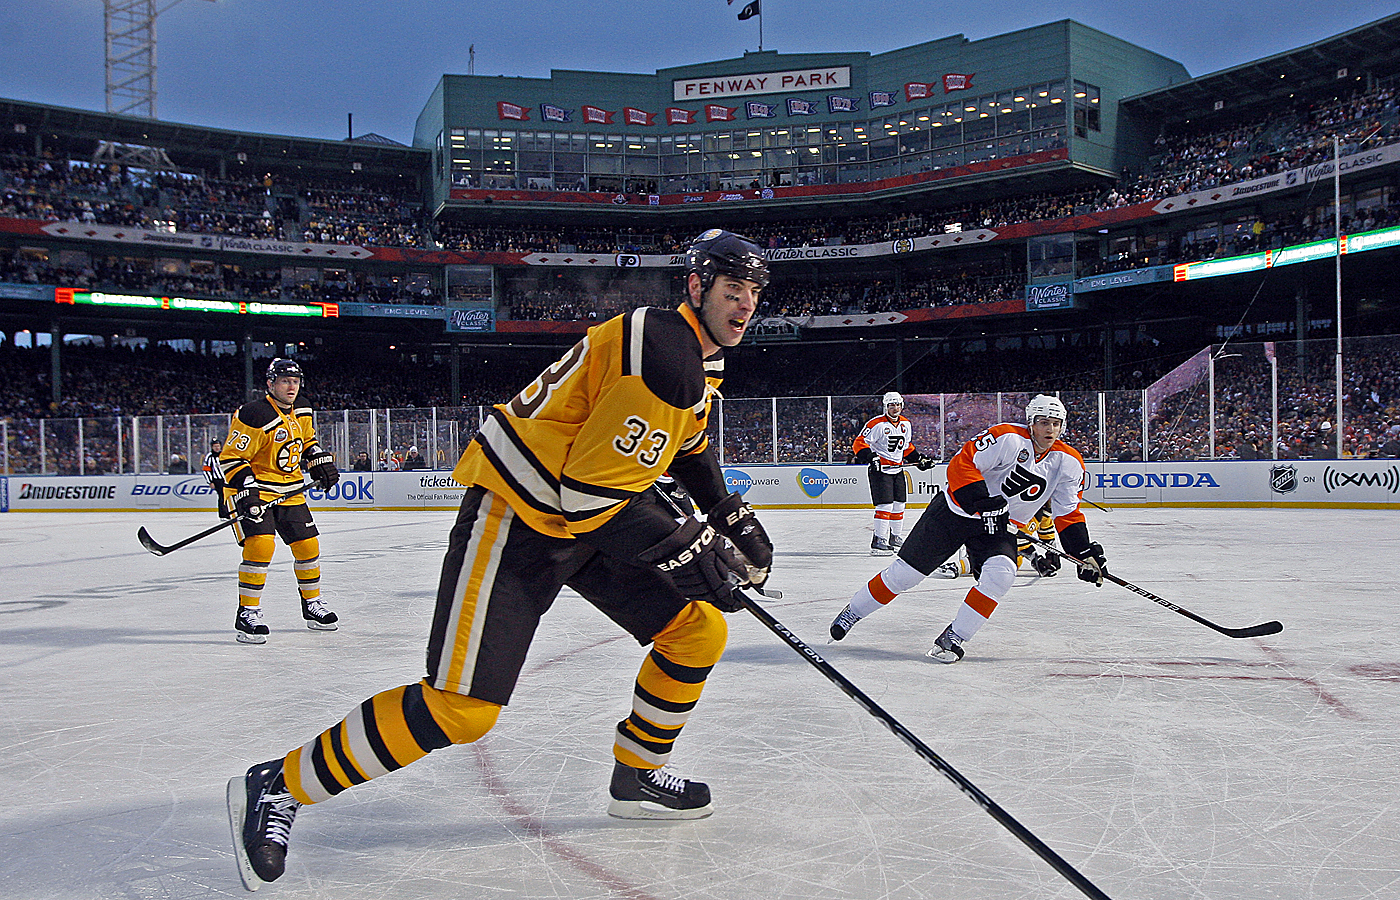 2023 Winter Classic: Guide to the Bruins-Penguins game at Fenway Park